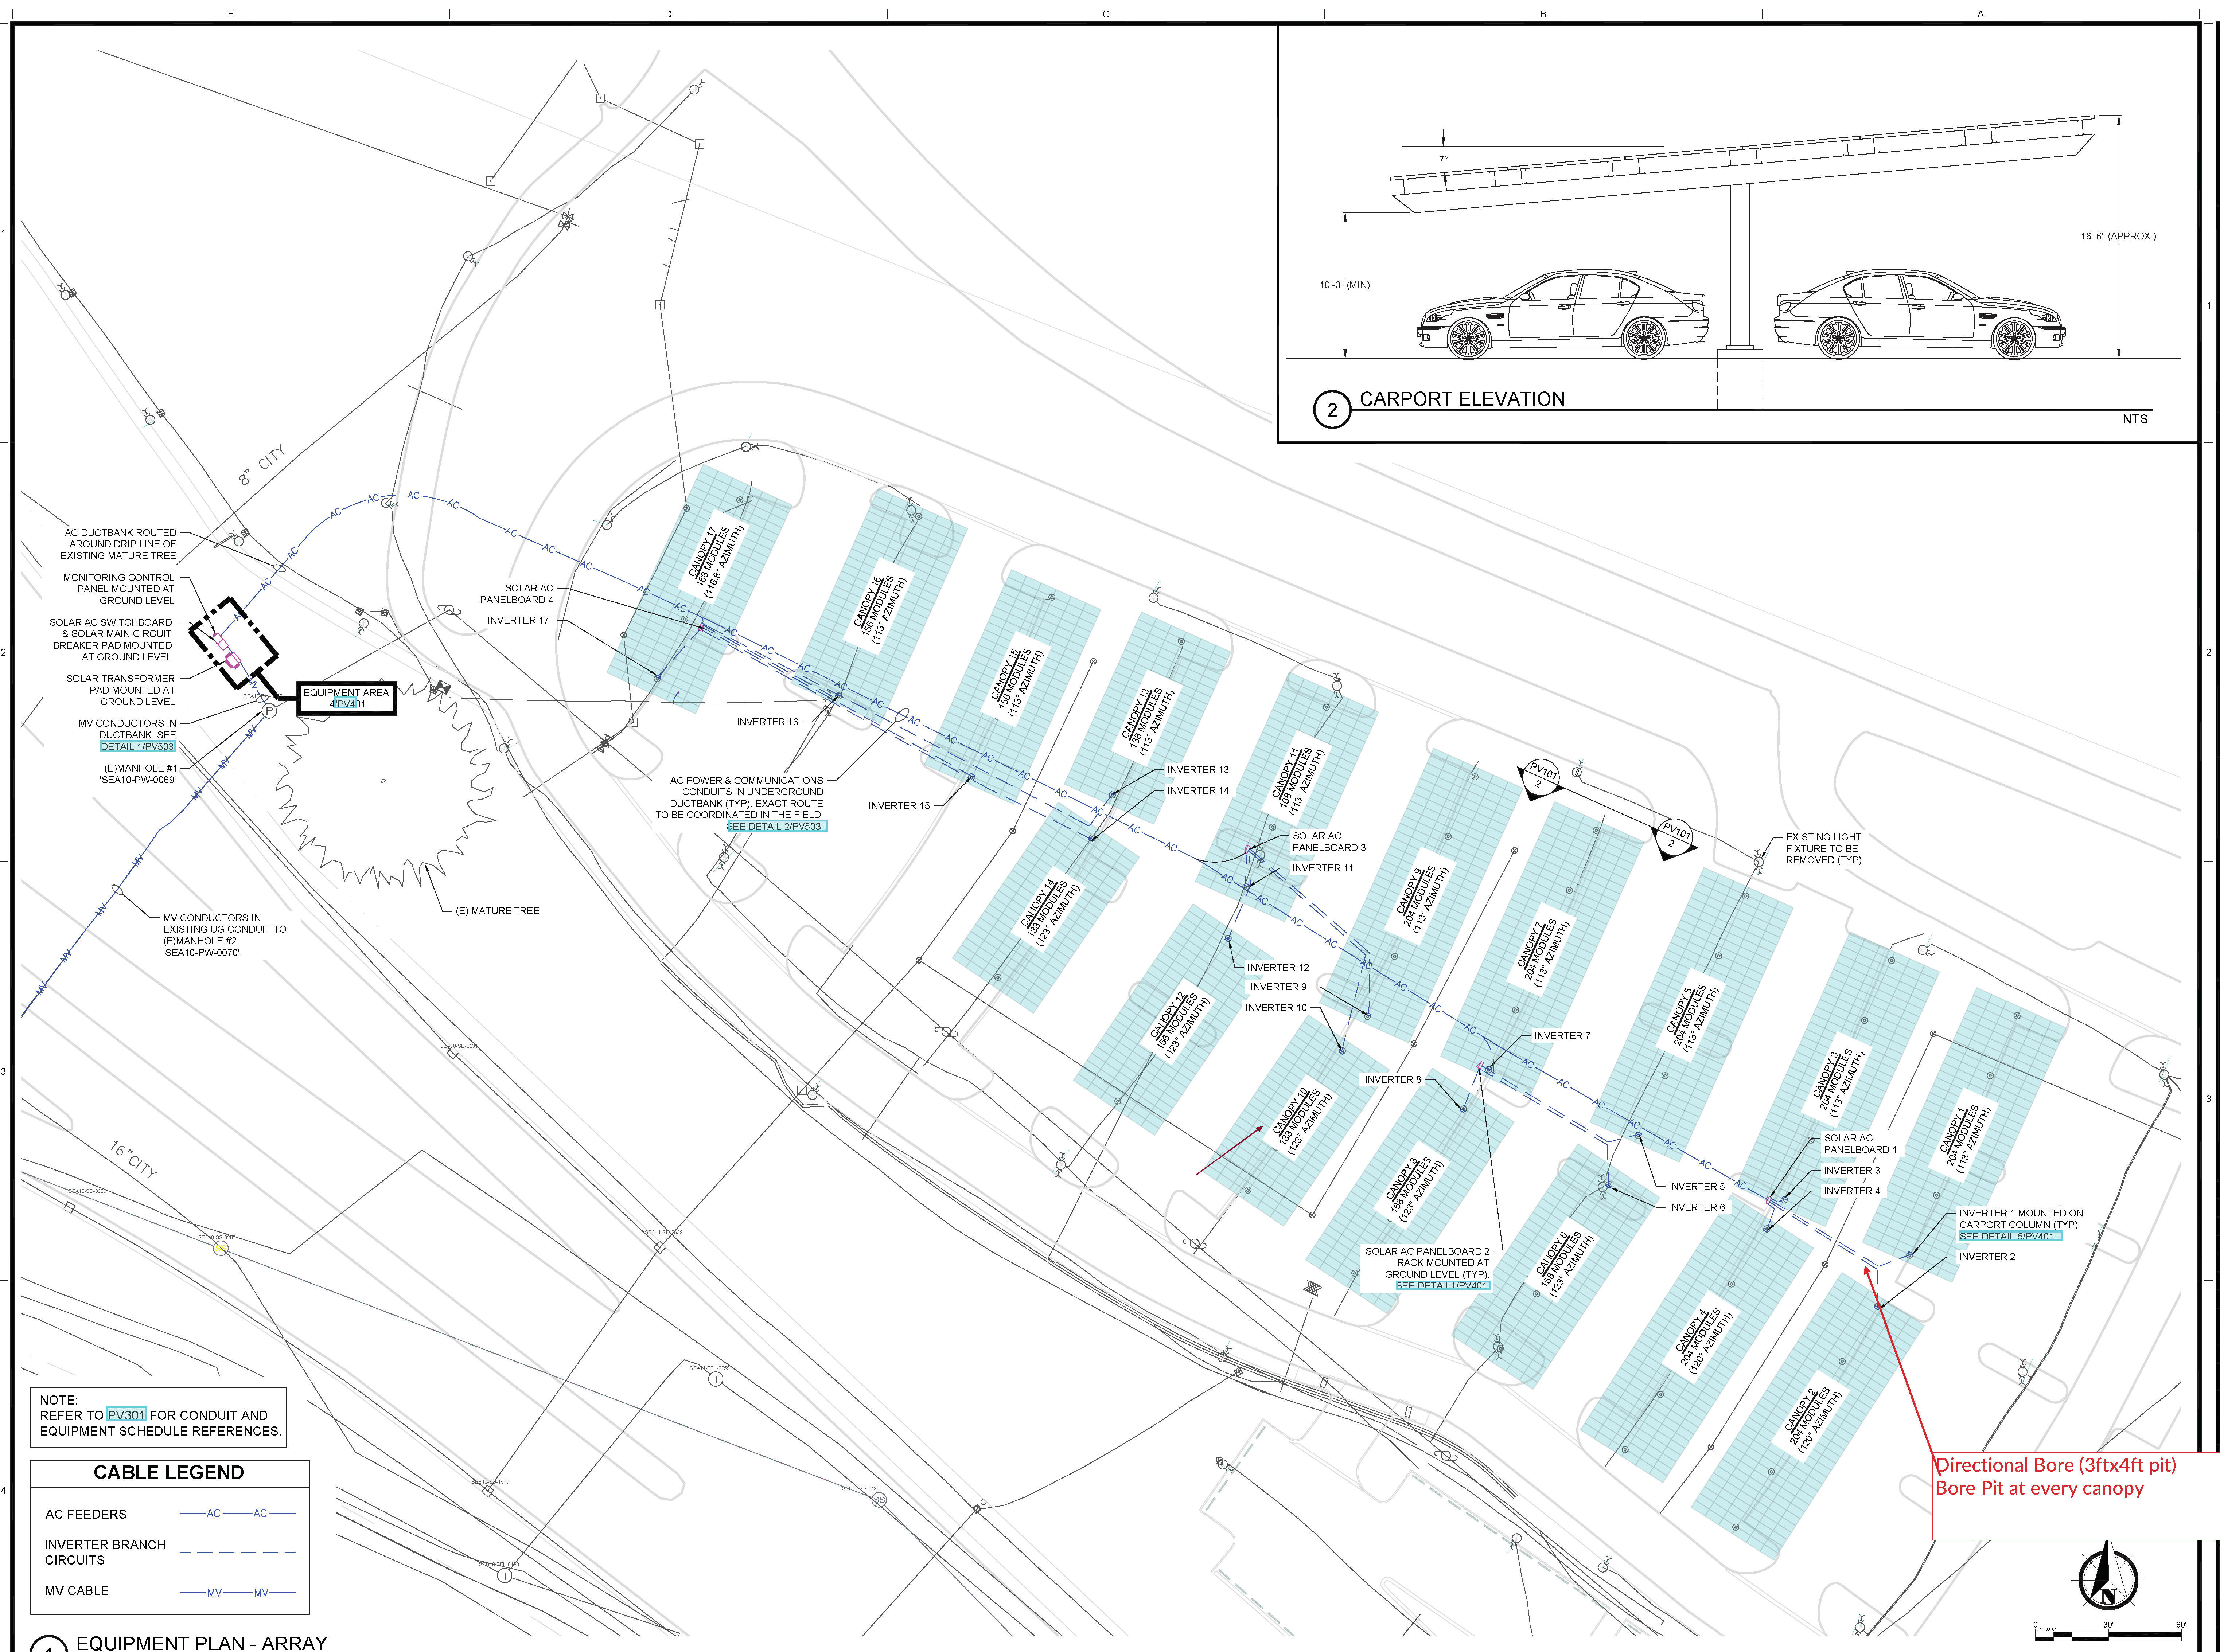 Image showing the proposed location of solar canopies in the R-6 parking lot